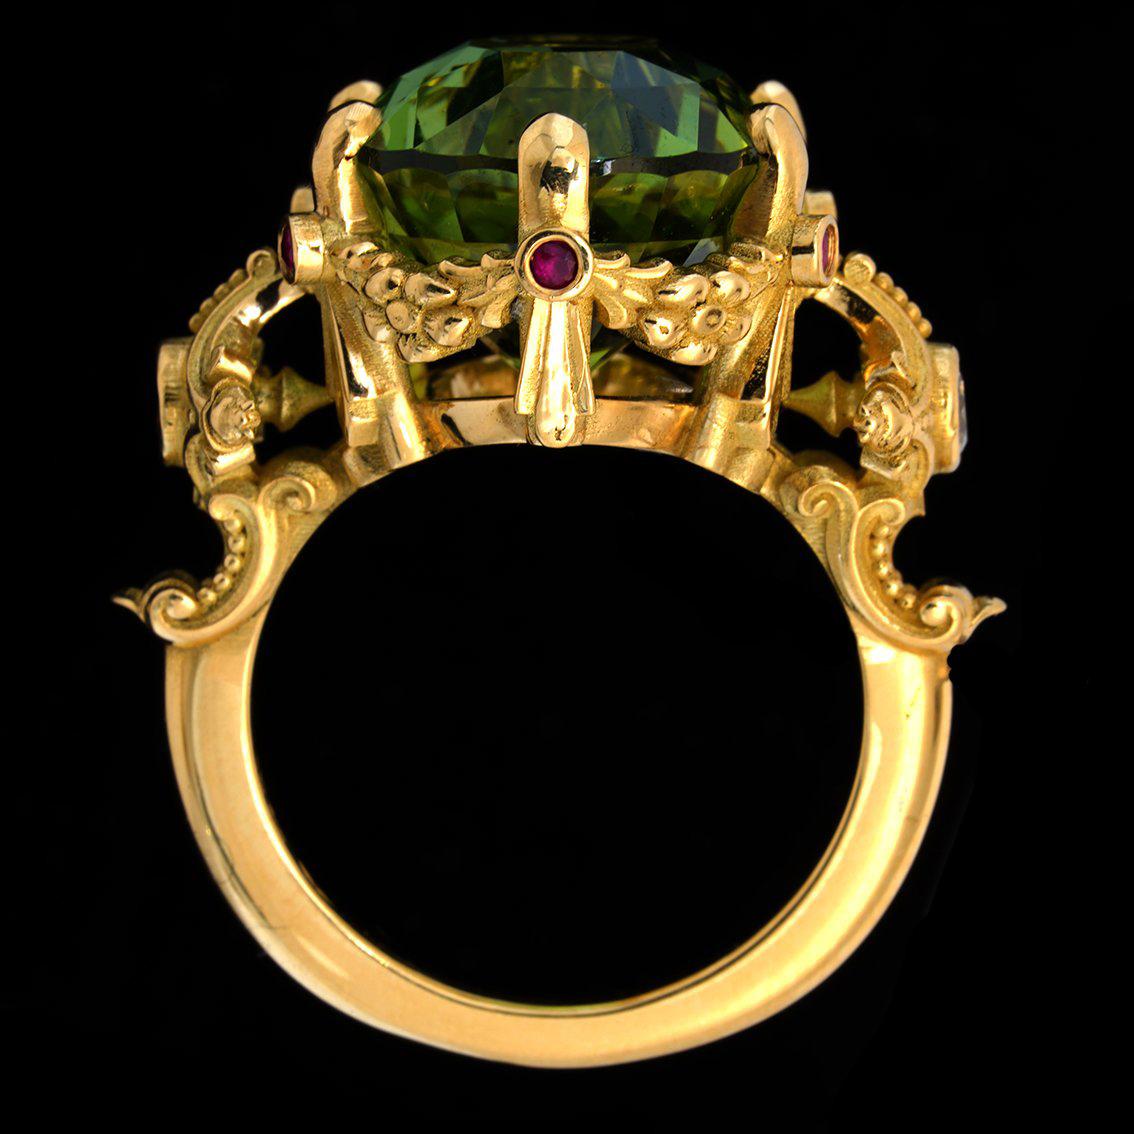 21ct Green Tourmaline, Rubies, Diamonds, & 18k Yellow Gold Antique Style Ring For Sale 4